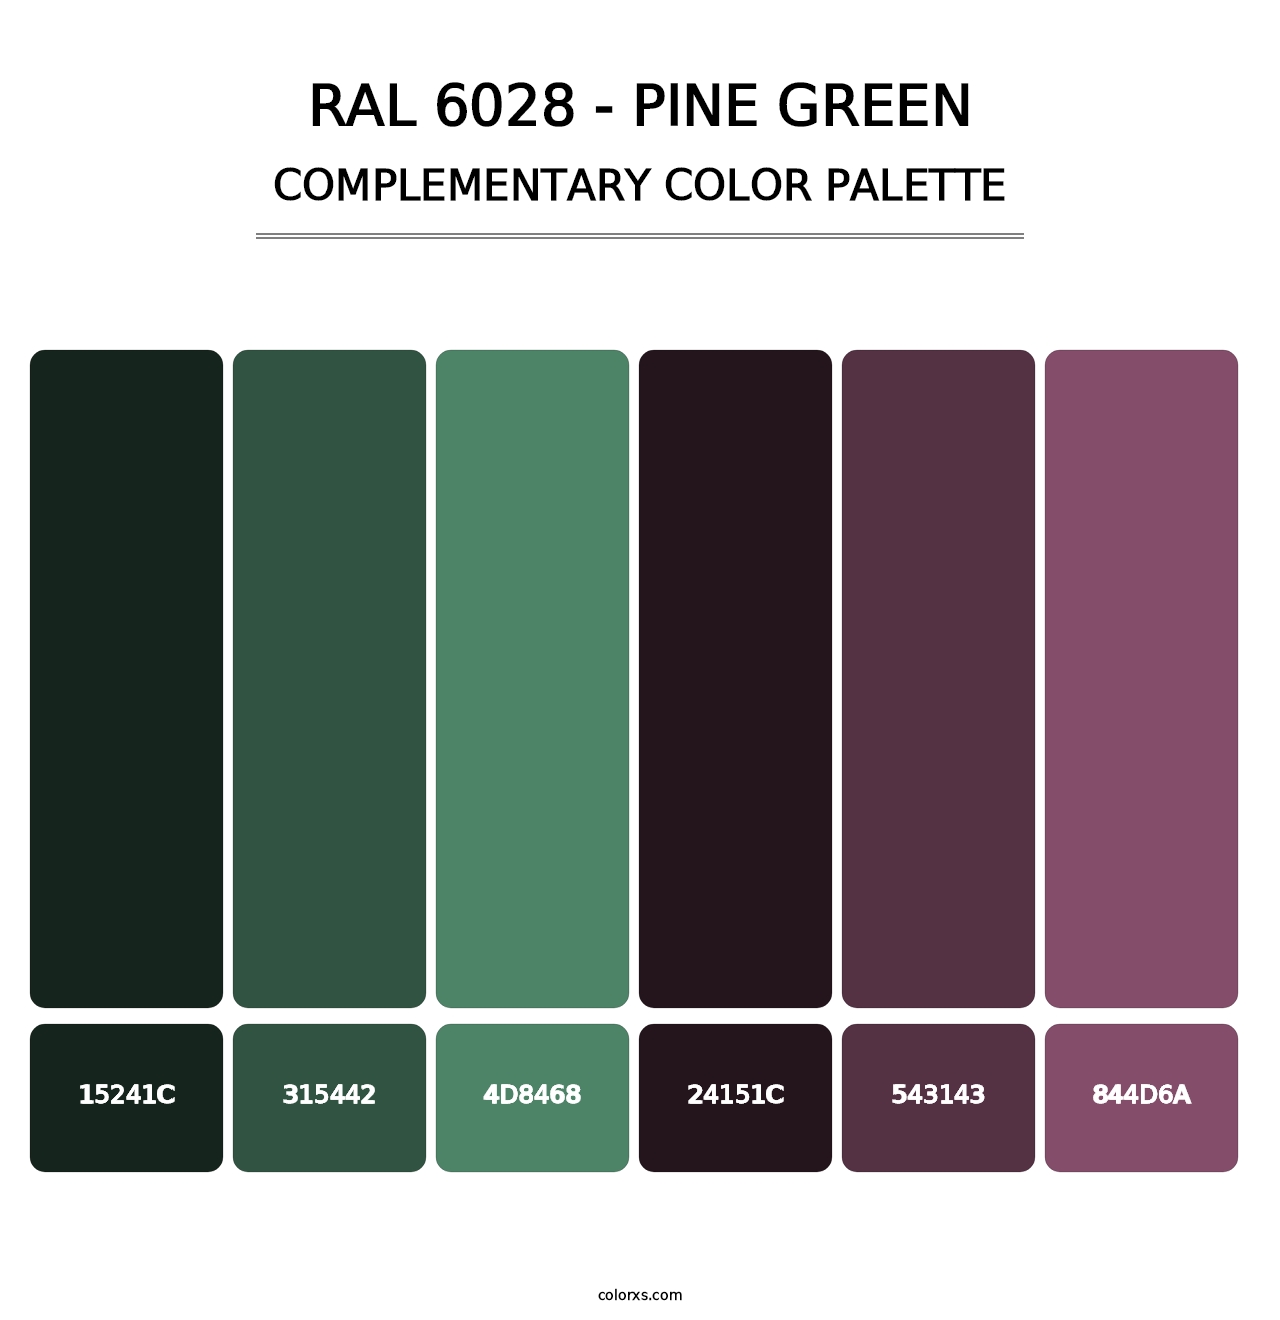 RAL 6028 - Pine Green - Complementary Color Palette